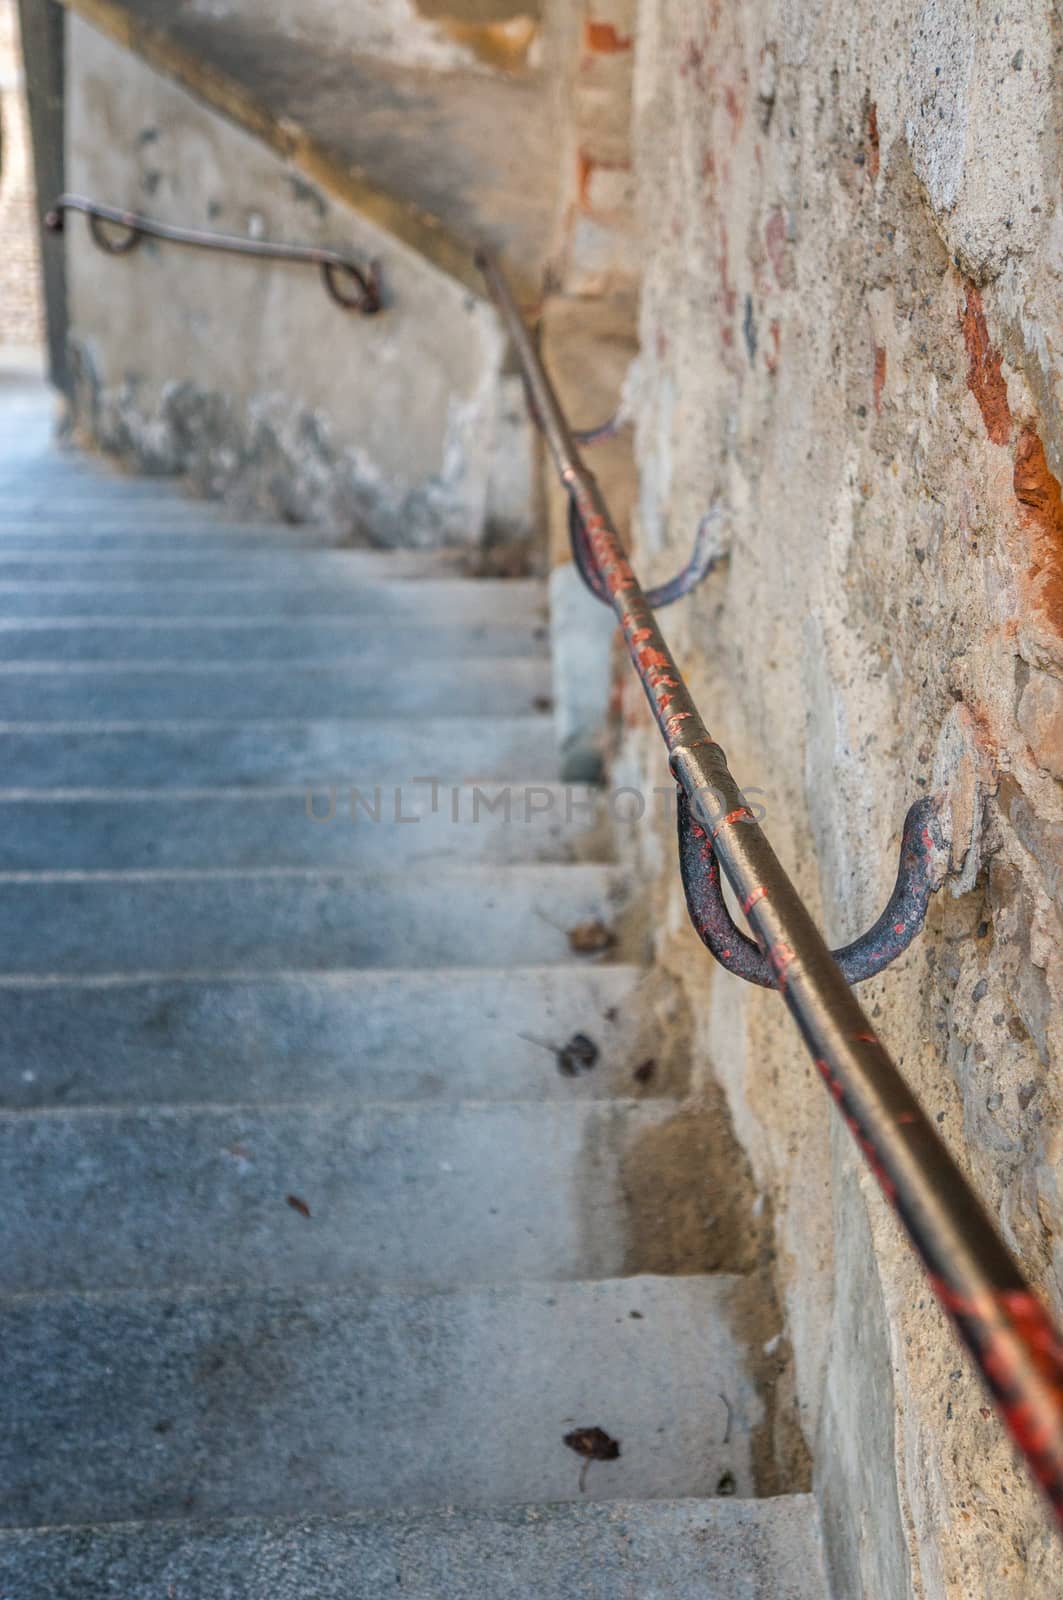 Close up shot of rust hand rail down stairs with red chipped off paint against worn stone wall. Stone steps in bright passage down a hill.